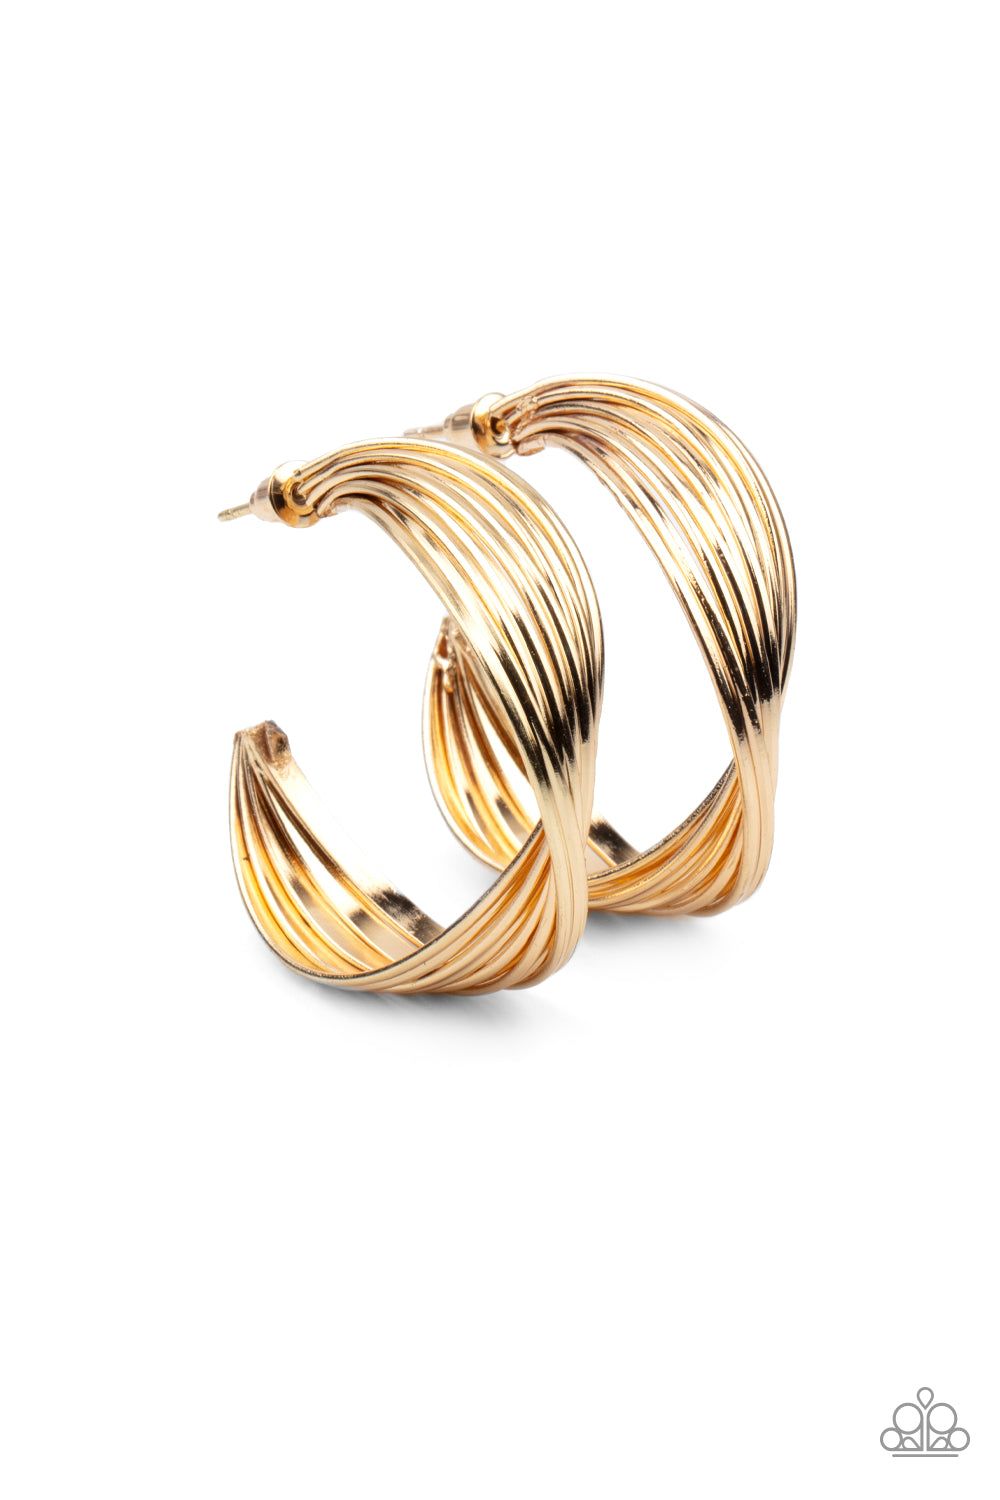 Curves In All The Right Places - Gold Earrings - Paparazzi Accessories